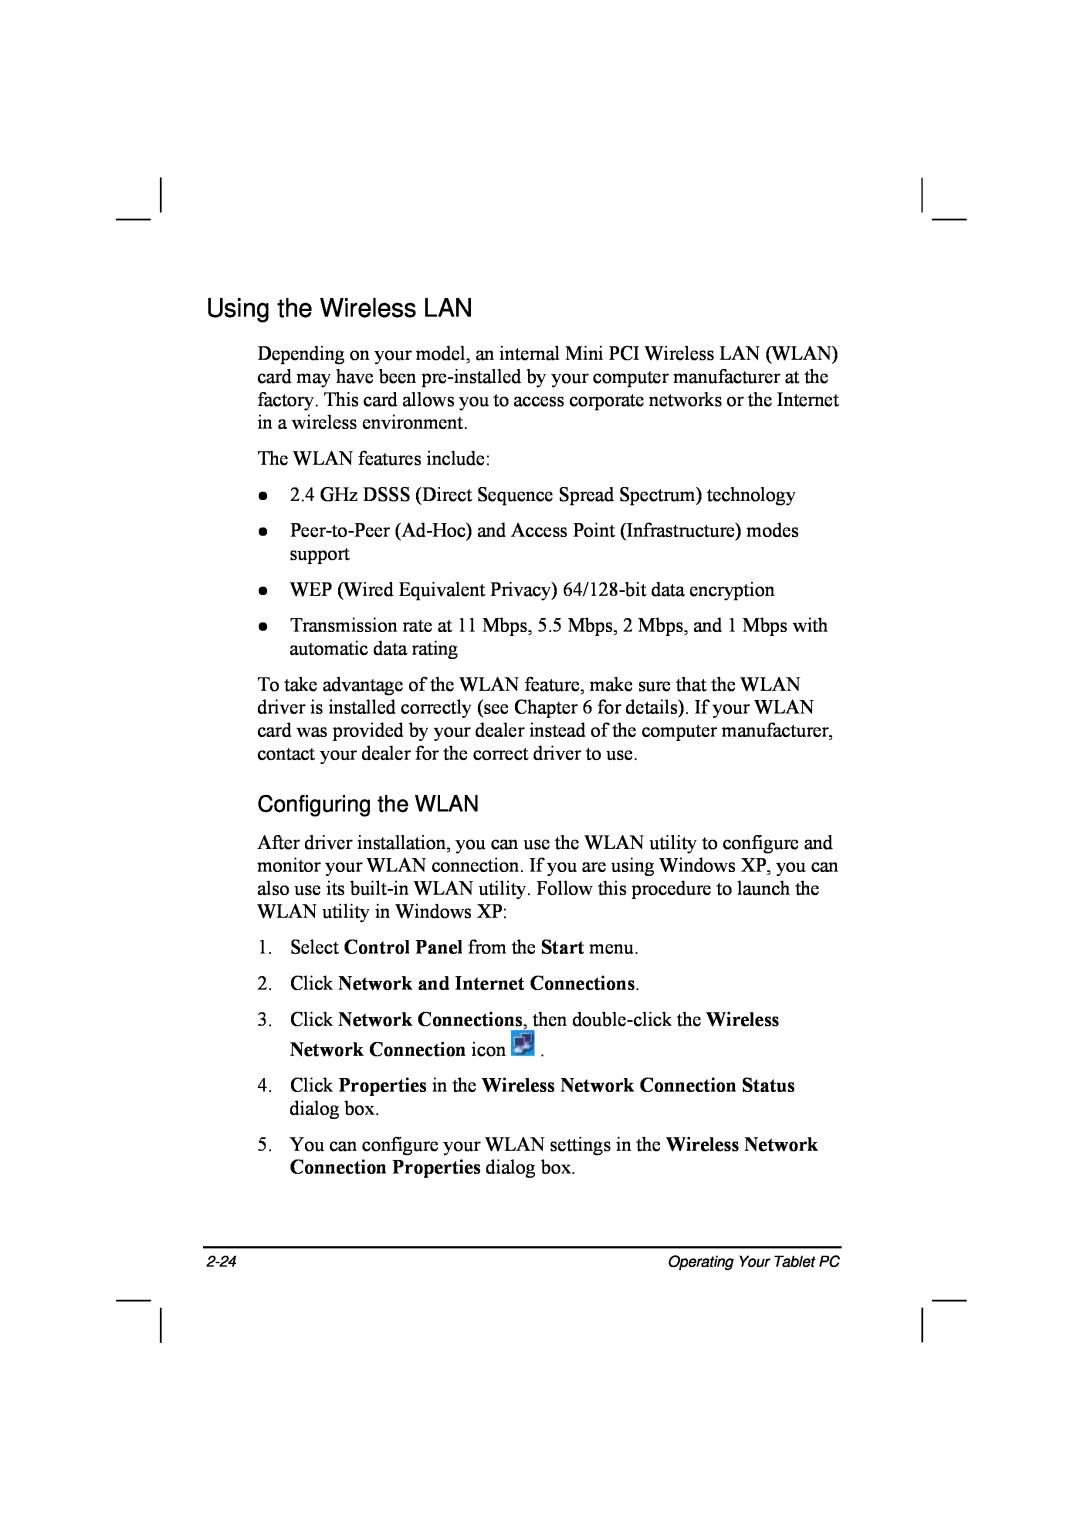 TAG 20 Series manual Using the Wireless LAN, Configuring the WLAN, Click Network and Internet Connections 